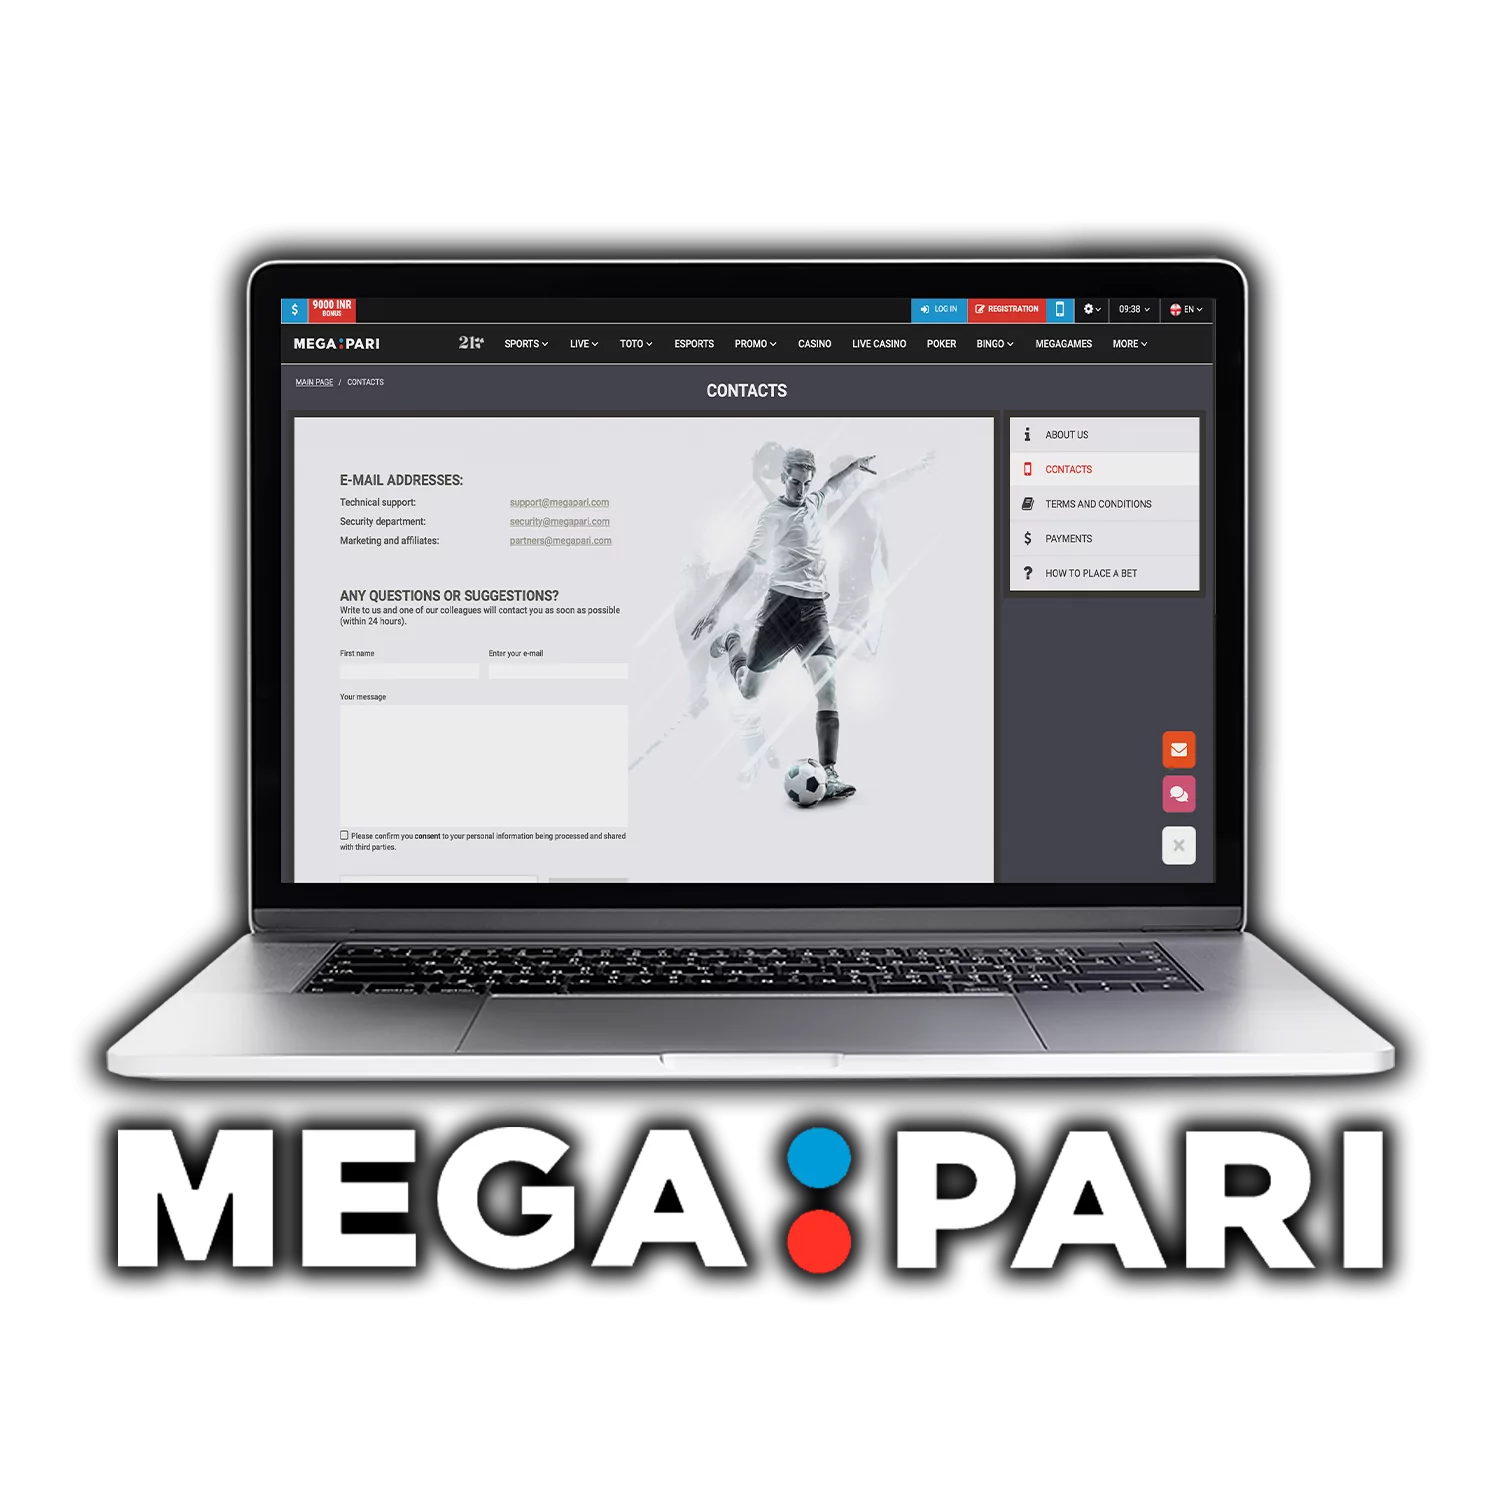 You can contact Mega Pari with the email or onlone chat.